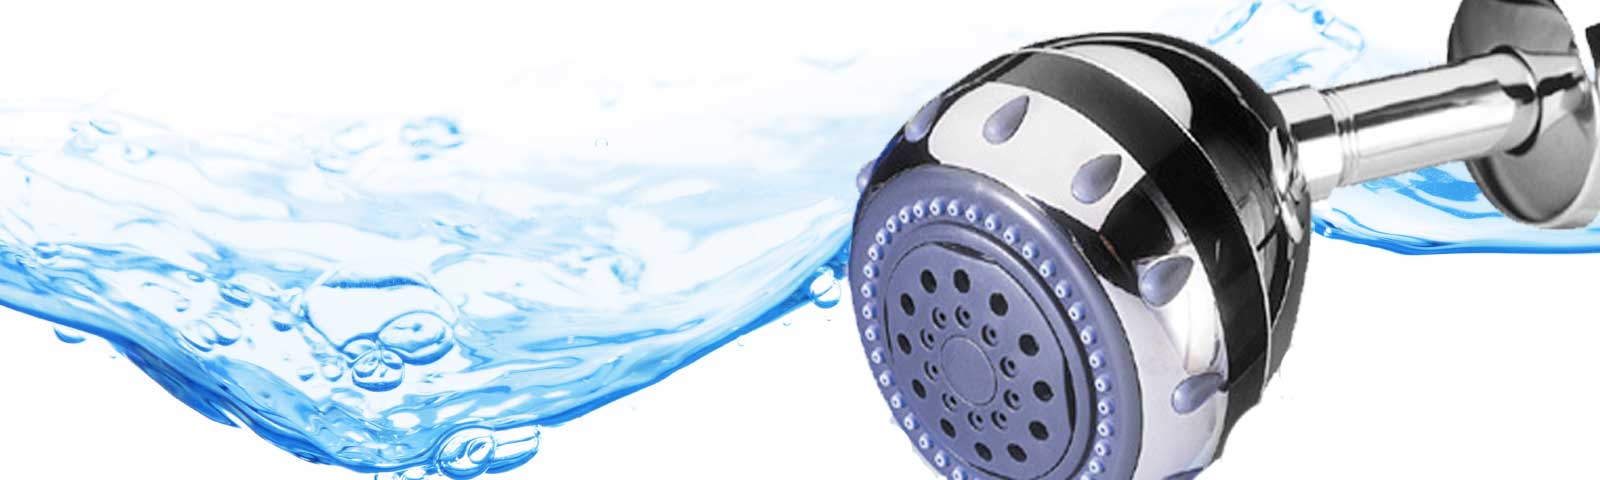 SHOWER WATER FILTERS - ELIMINATE THE EFFECTS OF CHLORINE